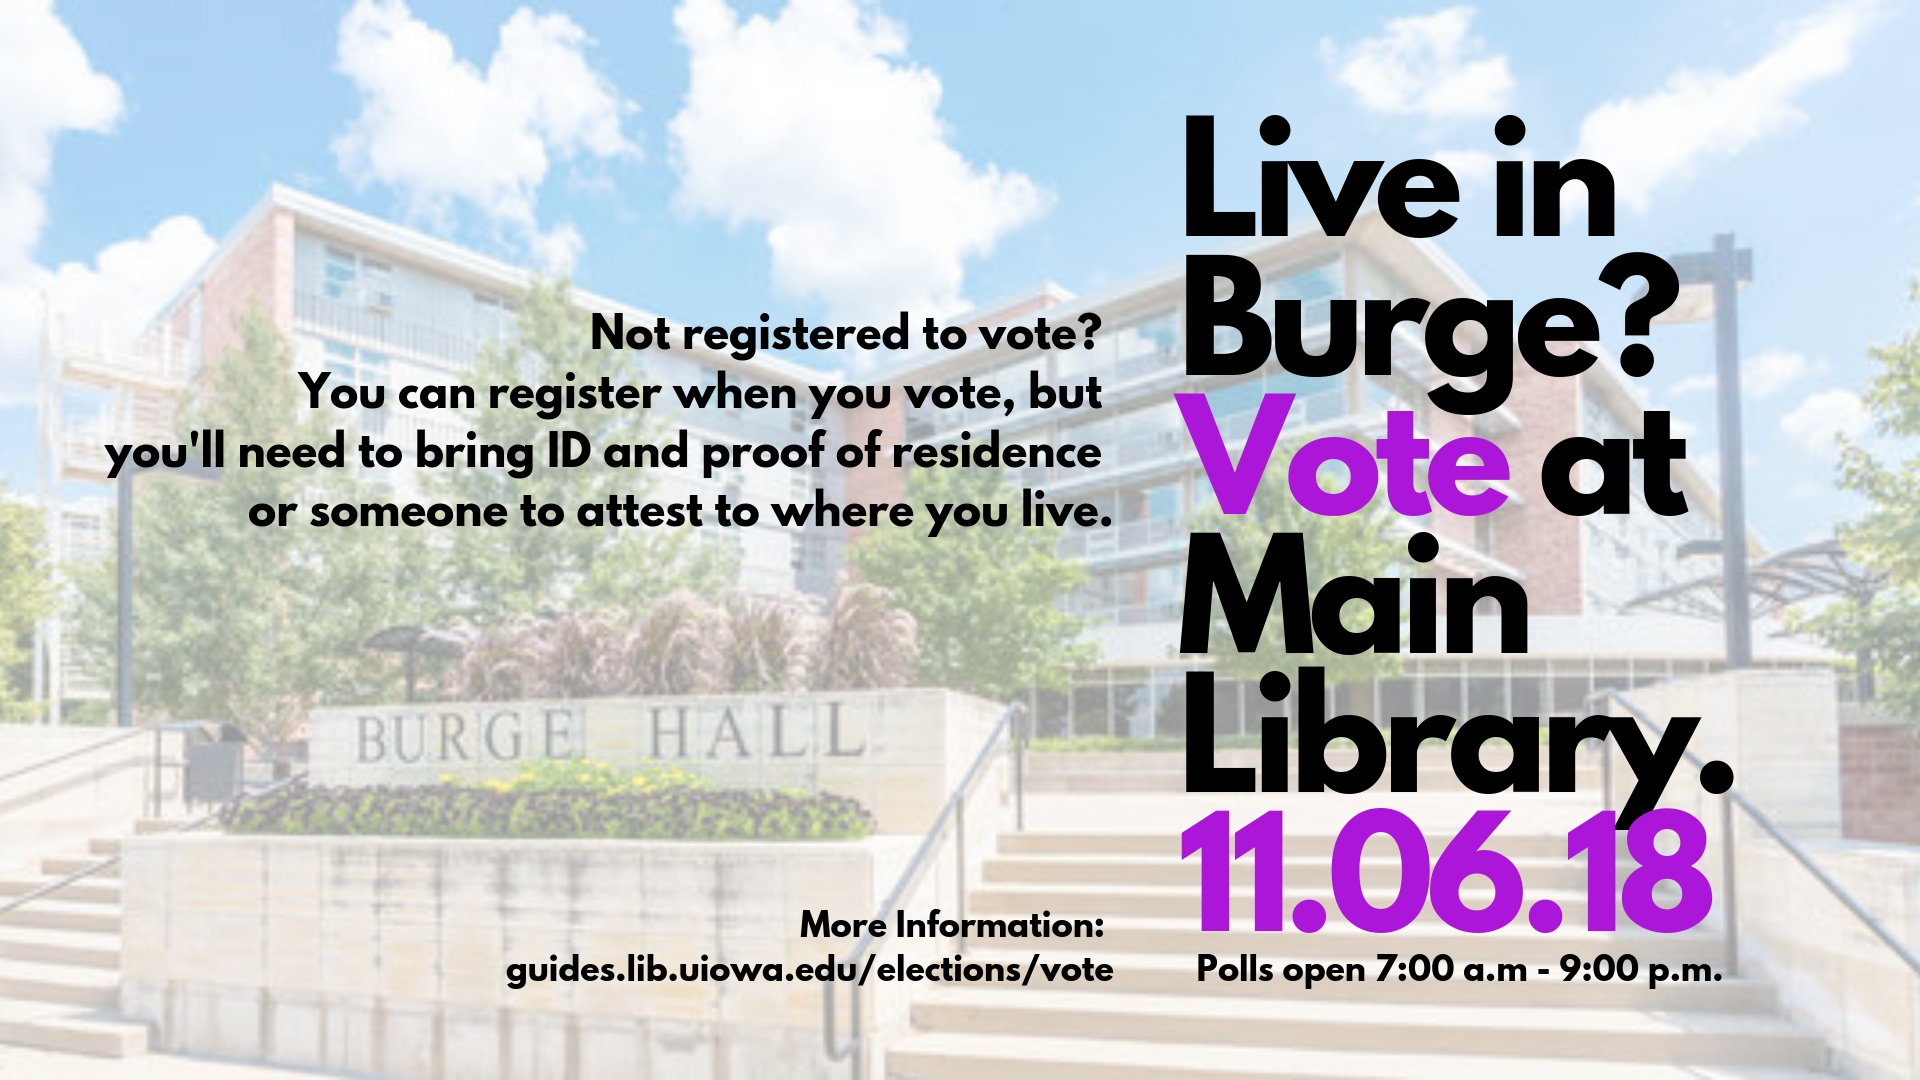 Burge Polling Place is Library